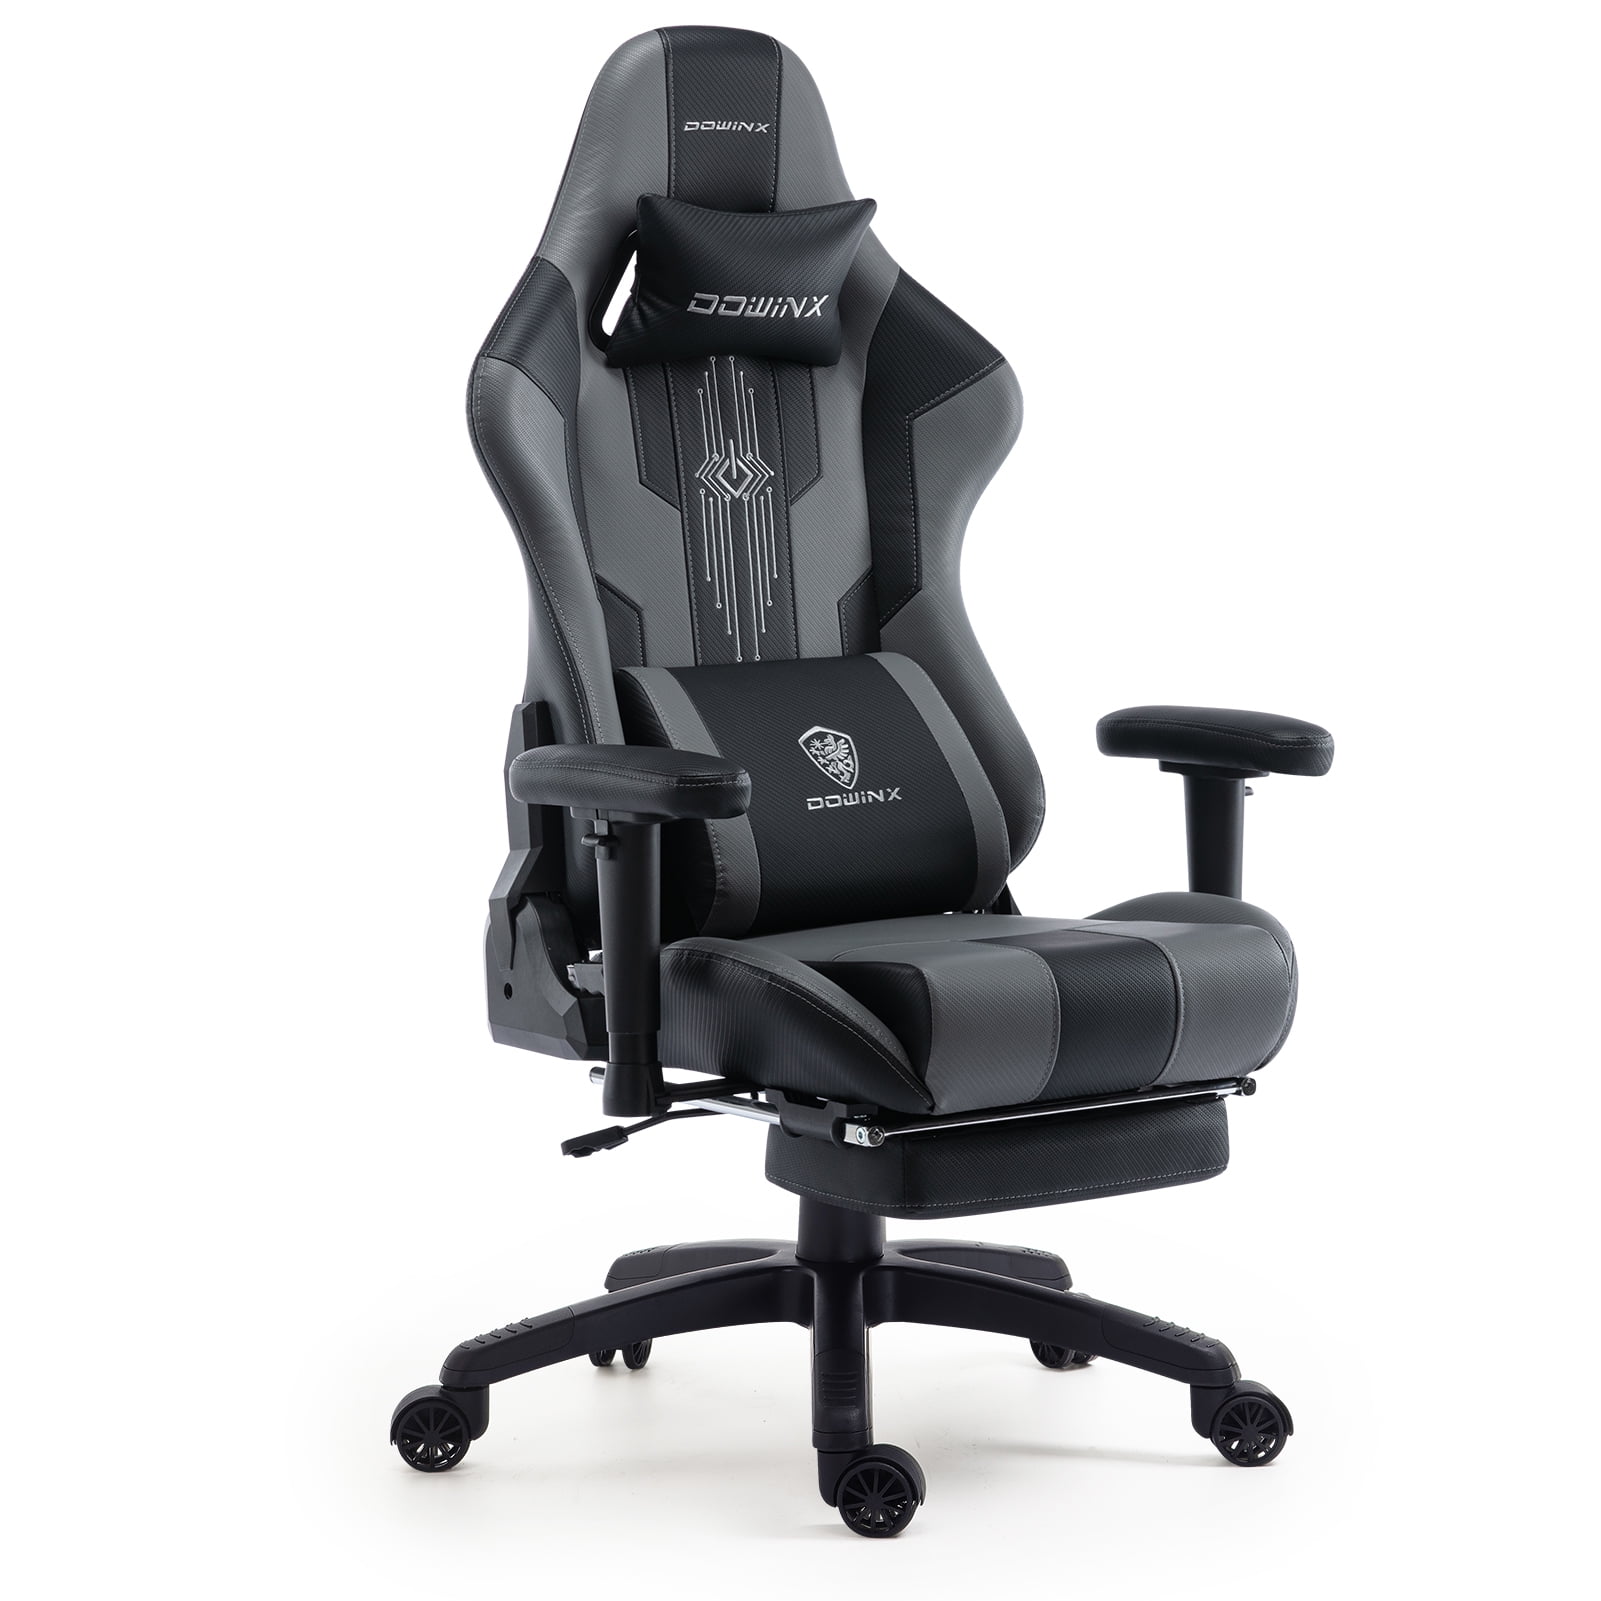 Dowinx Gaming Chair with Pocket Spring Cushion,Ergonomic Computer